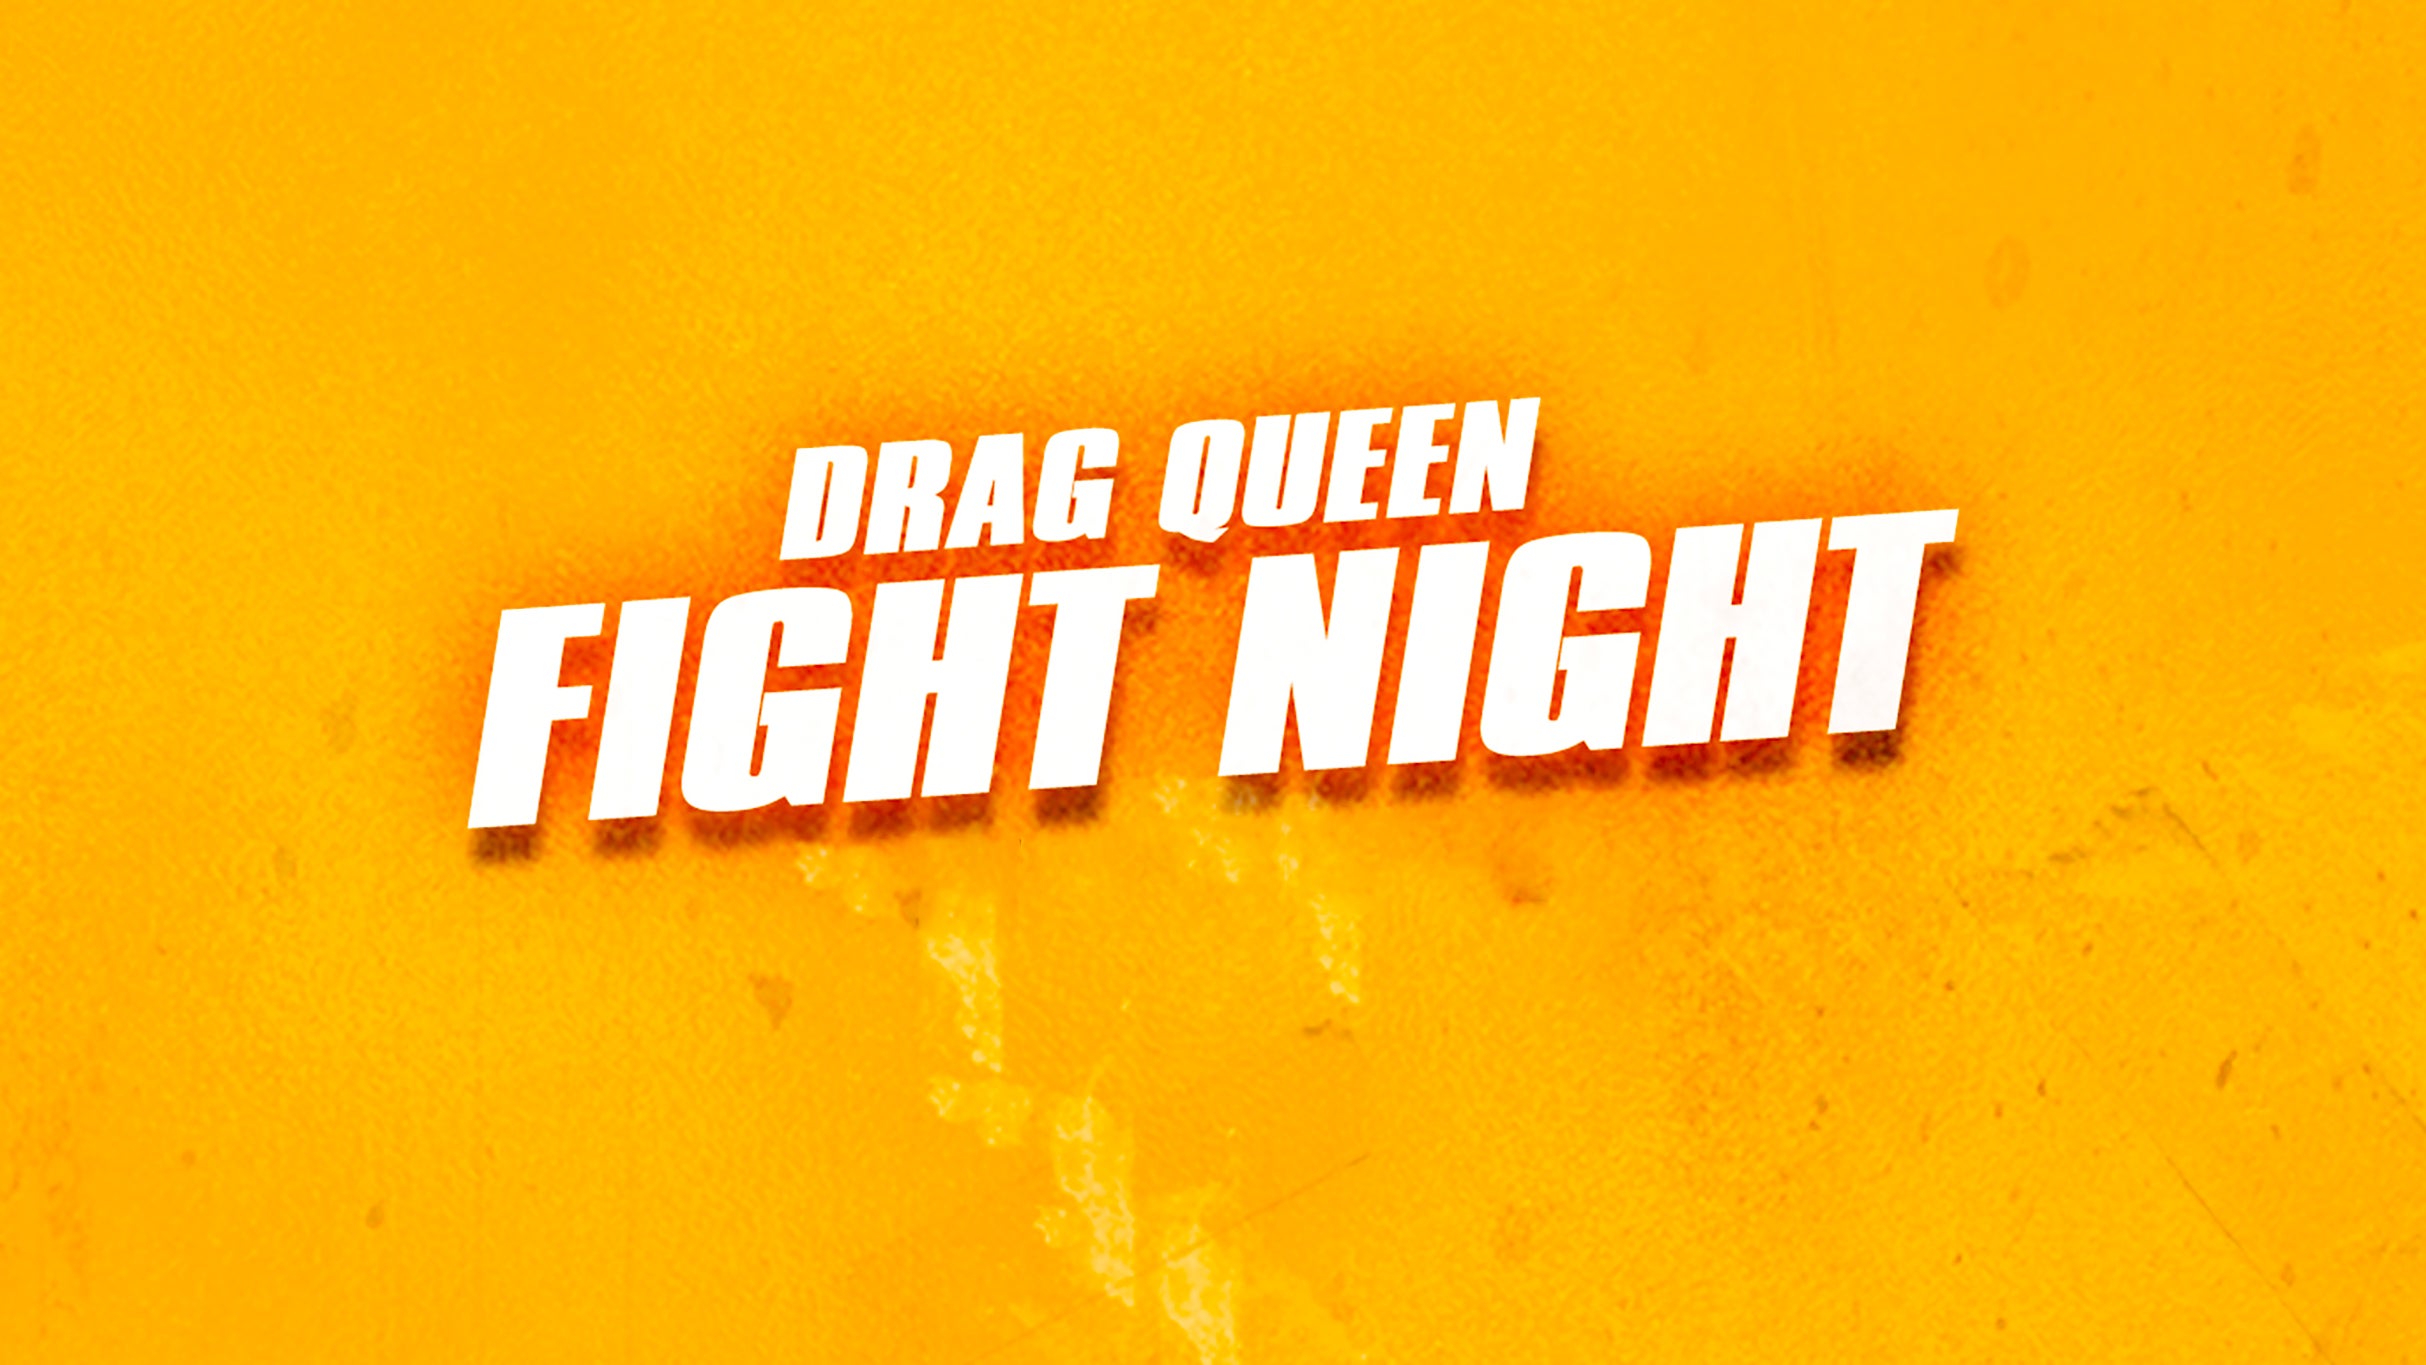 Drag Queen Fight Night with Carson Kressley in Bethlehem promo photo for 4 or More Discount  presale offer code